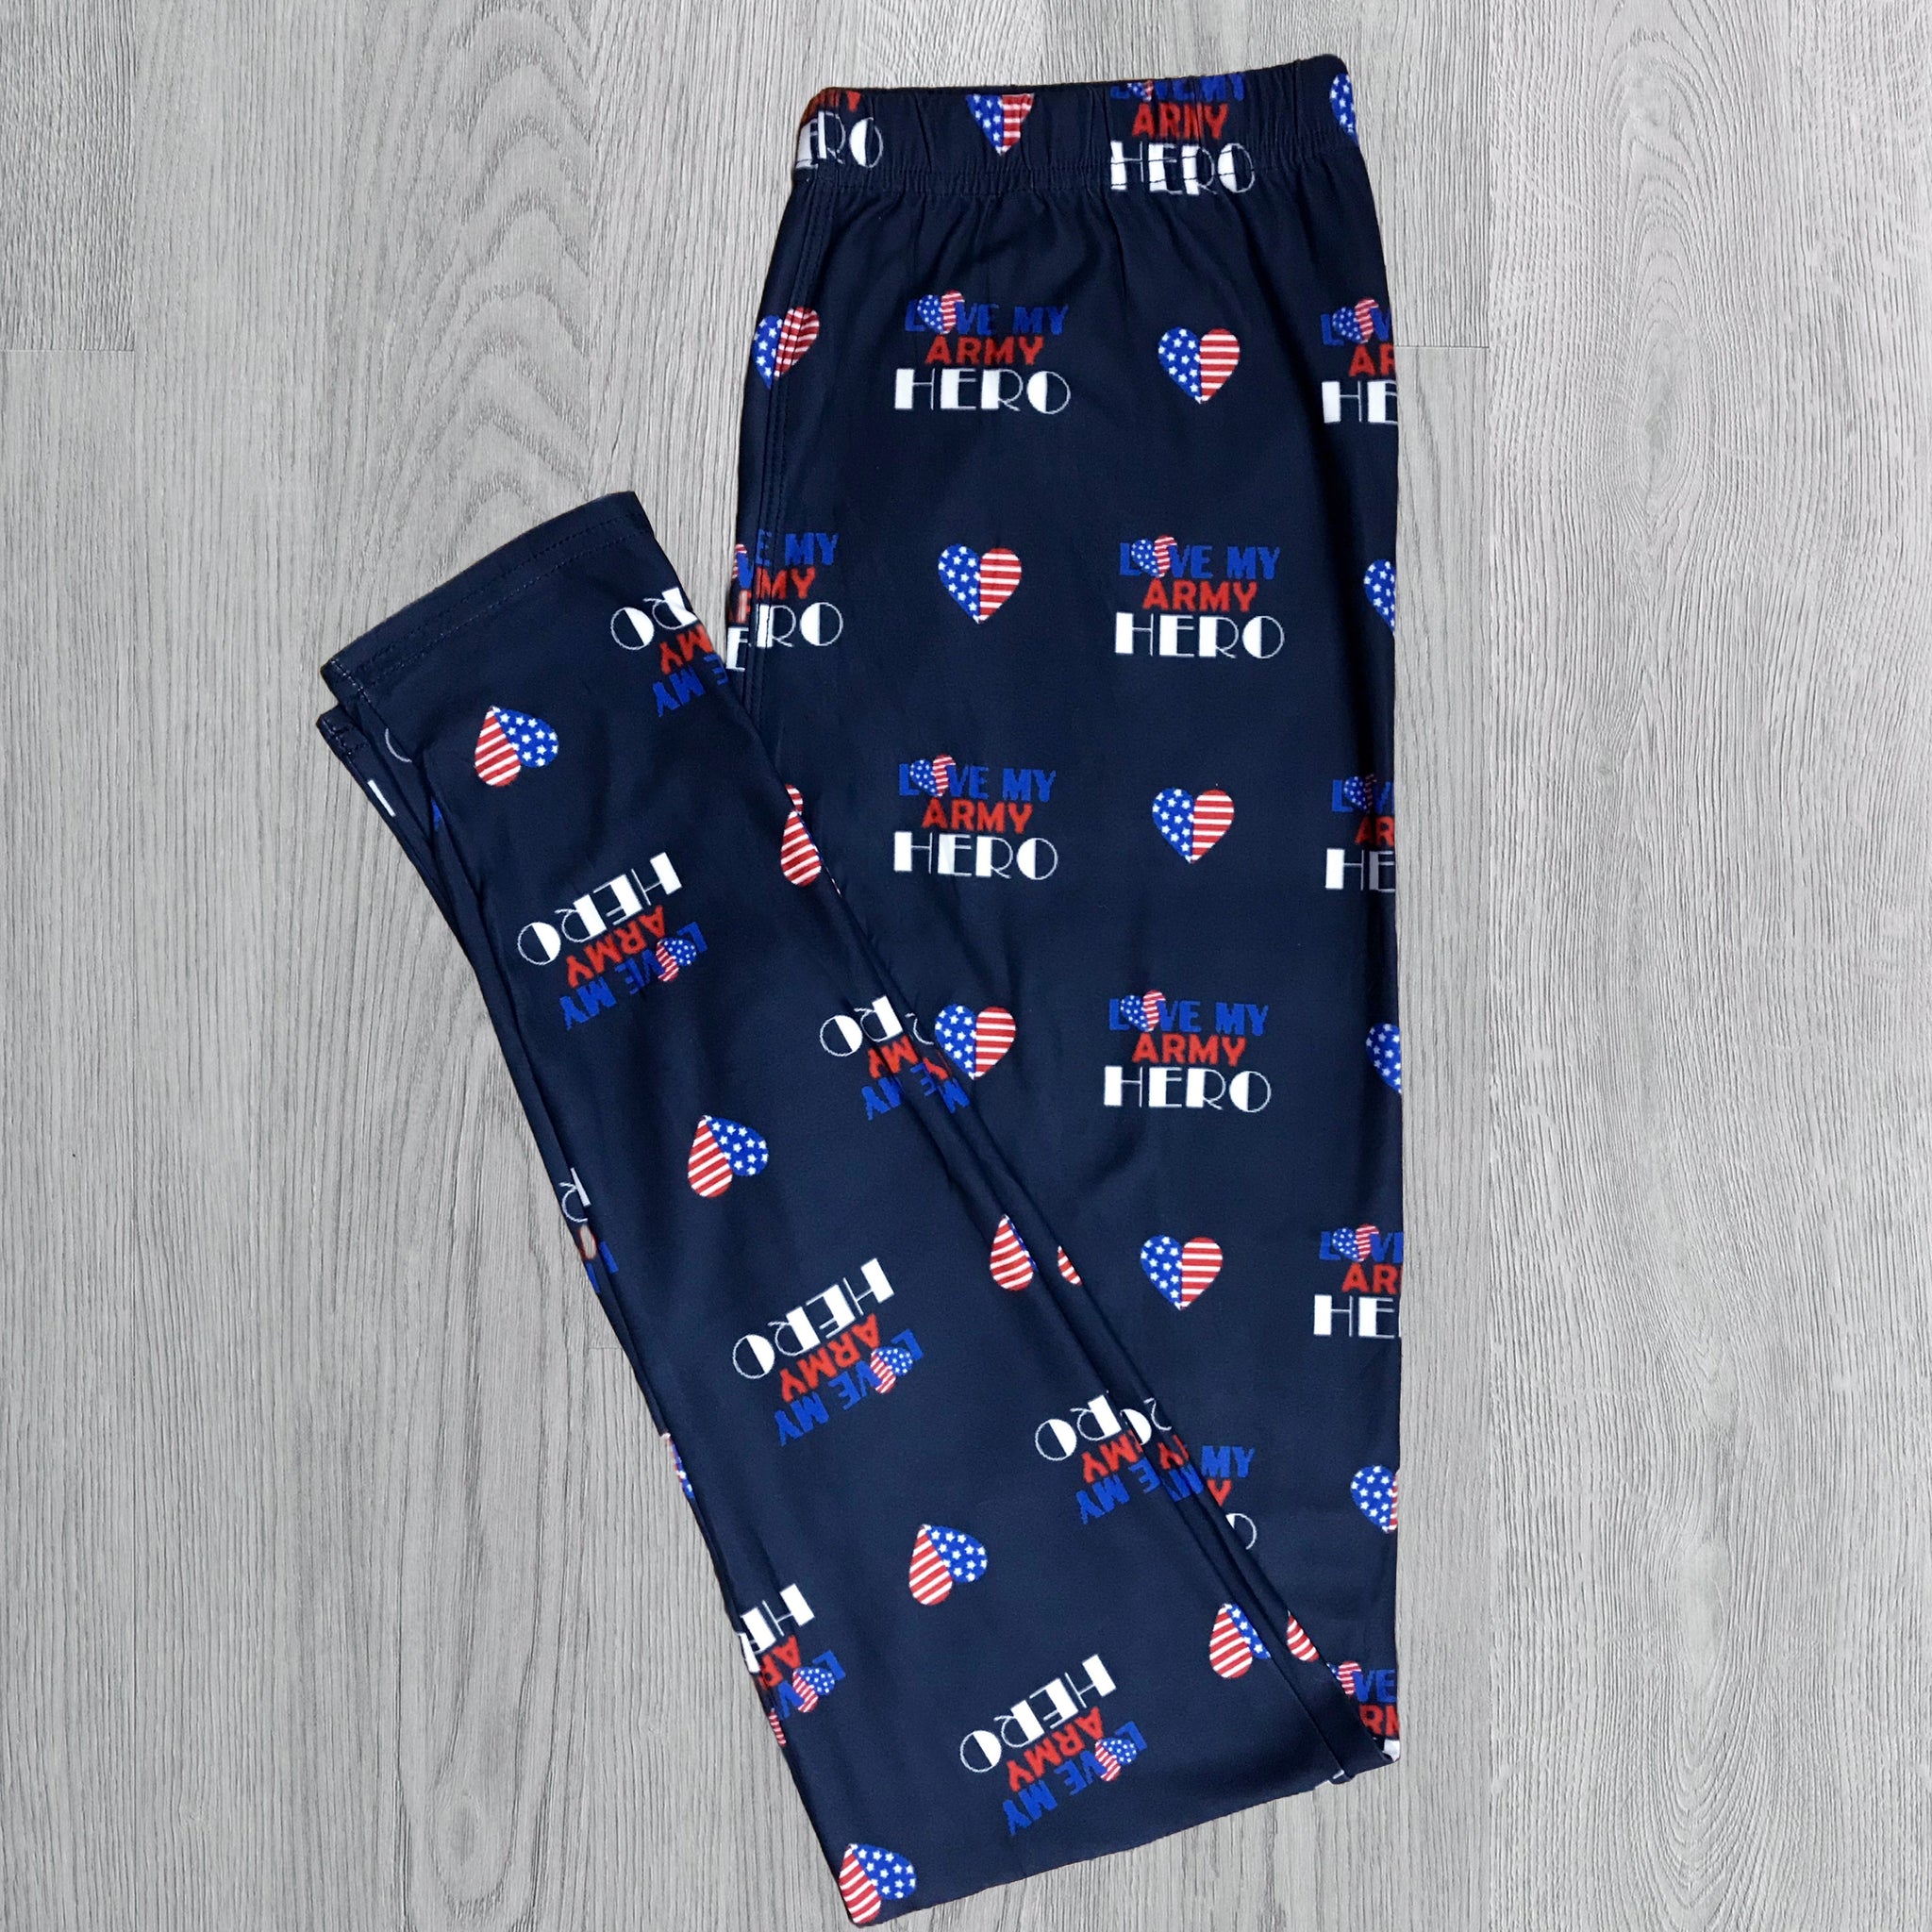 Patriotic Army Hero Heart Leggings - Comfortable, High-Waisted Stretch Leggings with Patriotic Flair